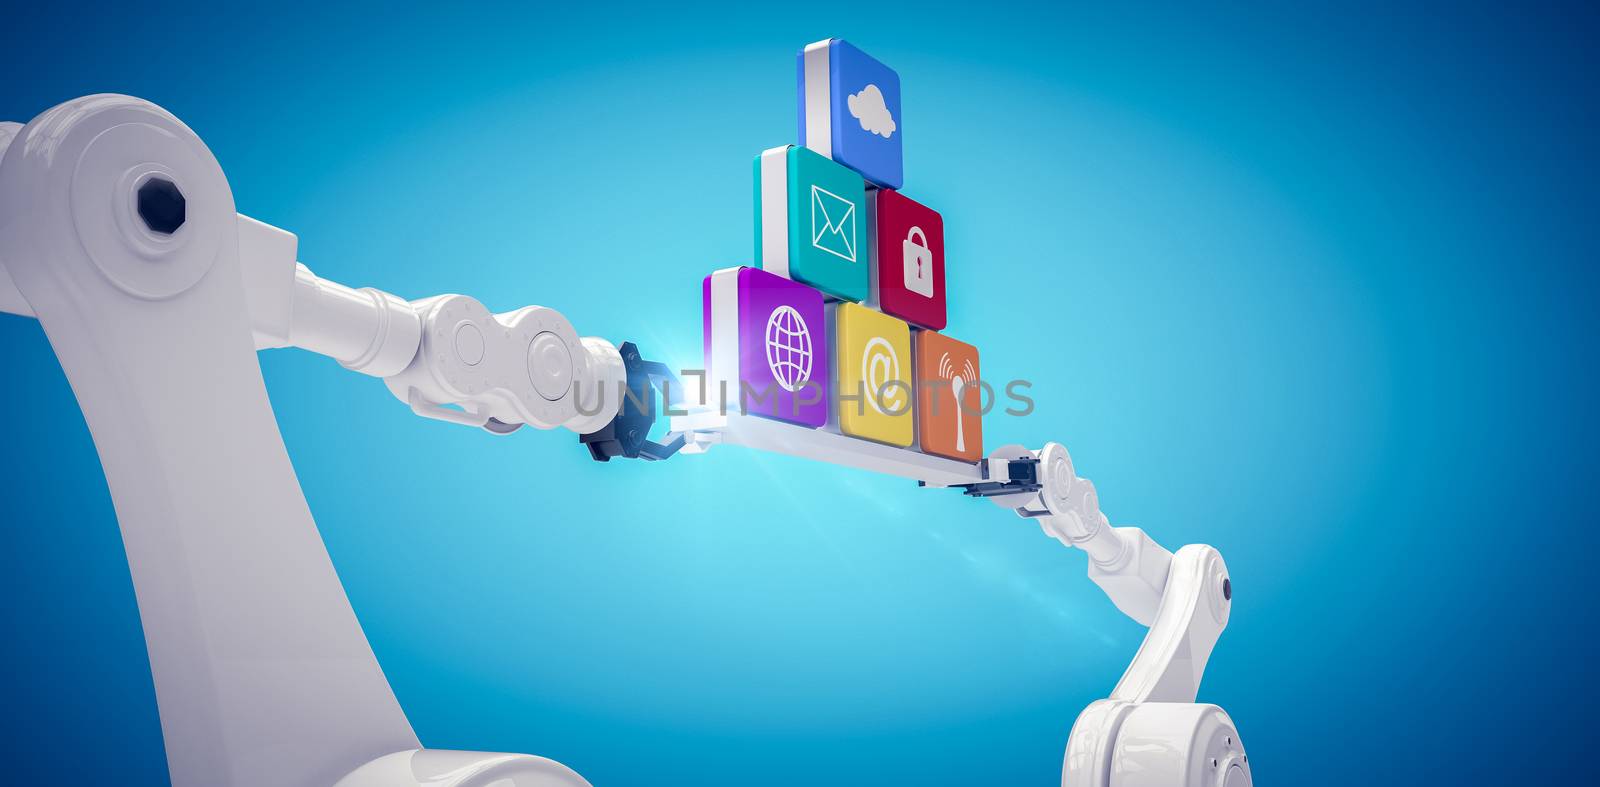 Robotic hands holding computer icons against white background against blue vignette 